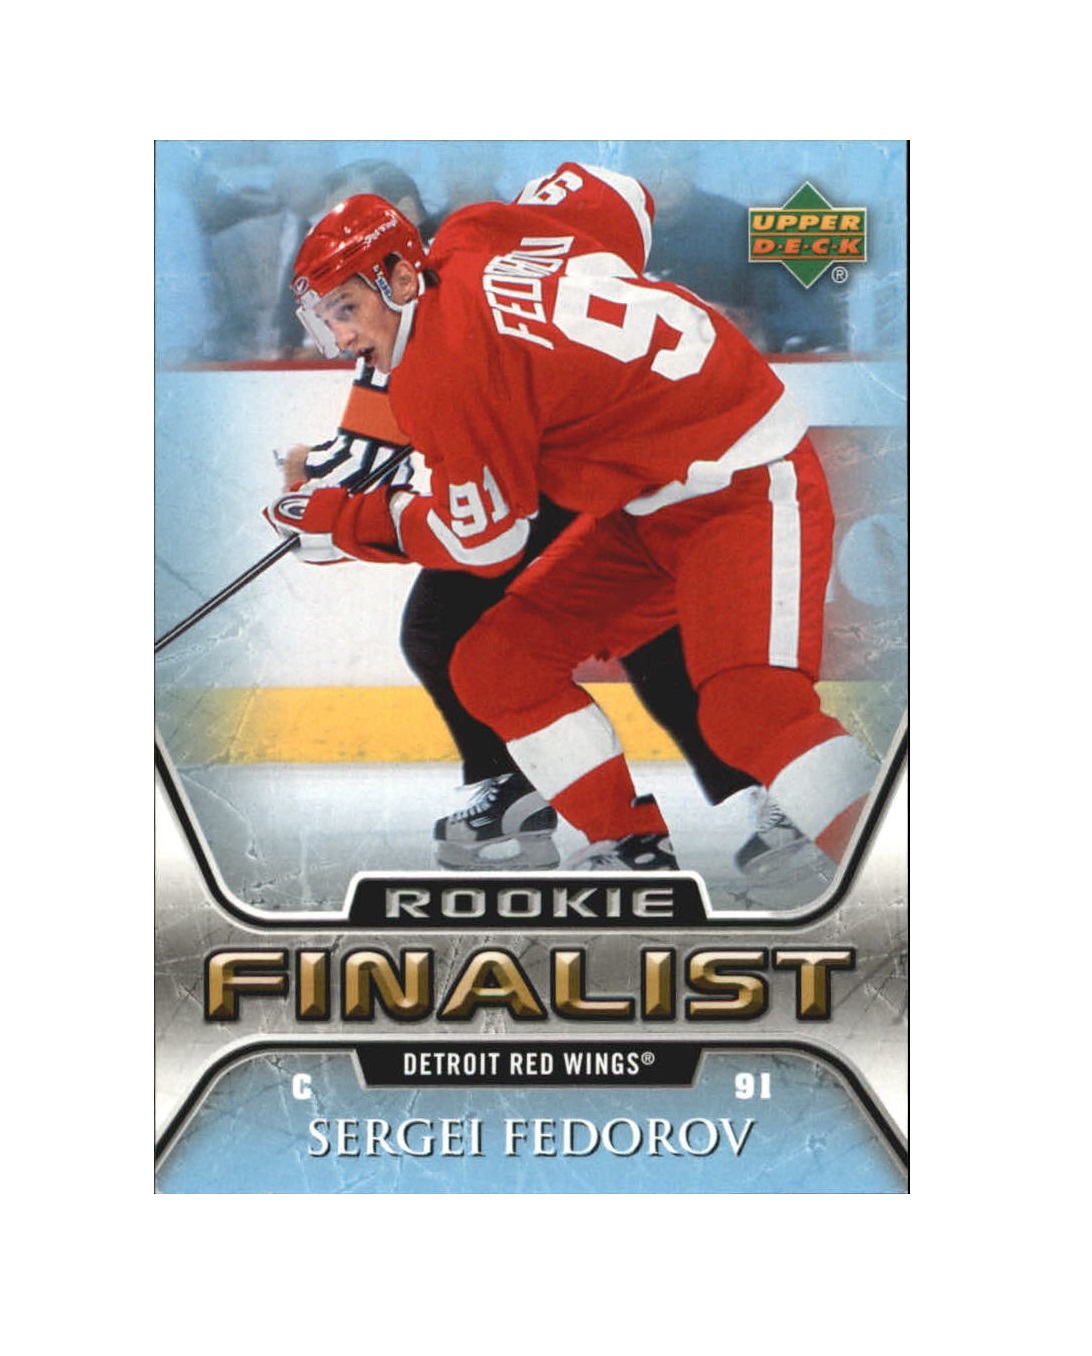 2005-06 Upper Deck All-Time Greatest #72 Sergei Fedorov (12-X191-RED WINGS)